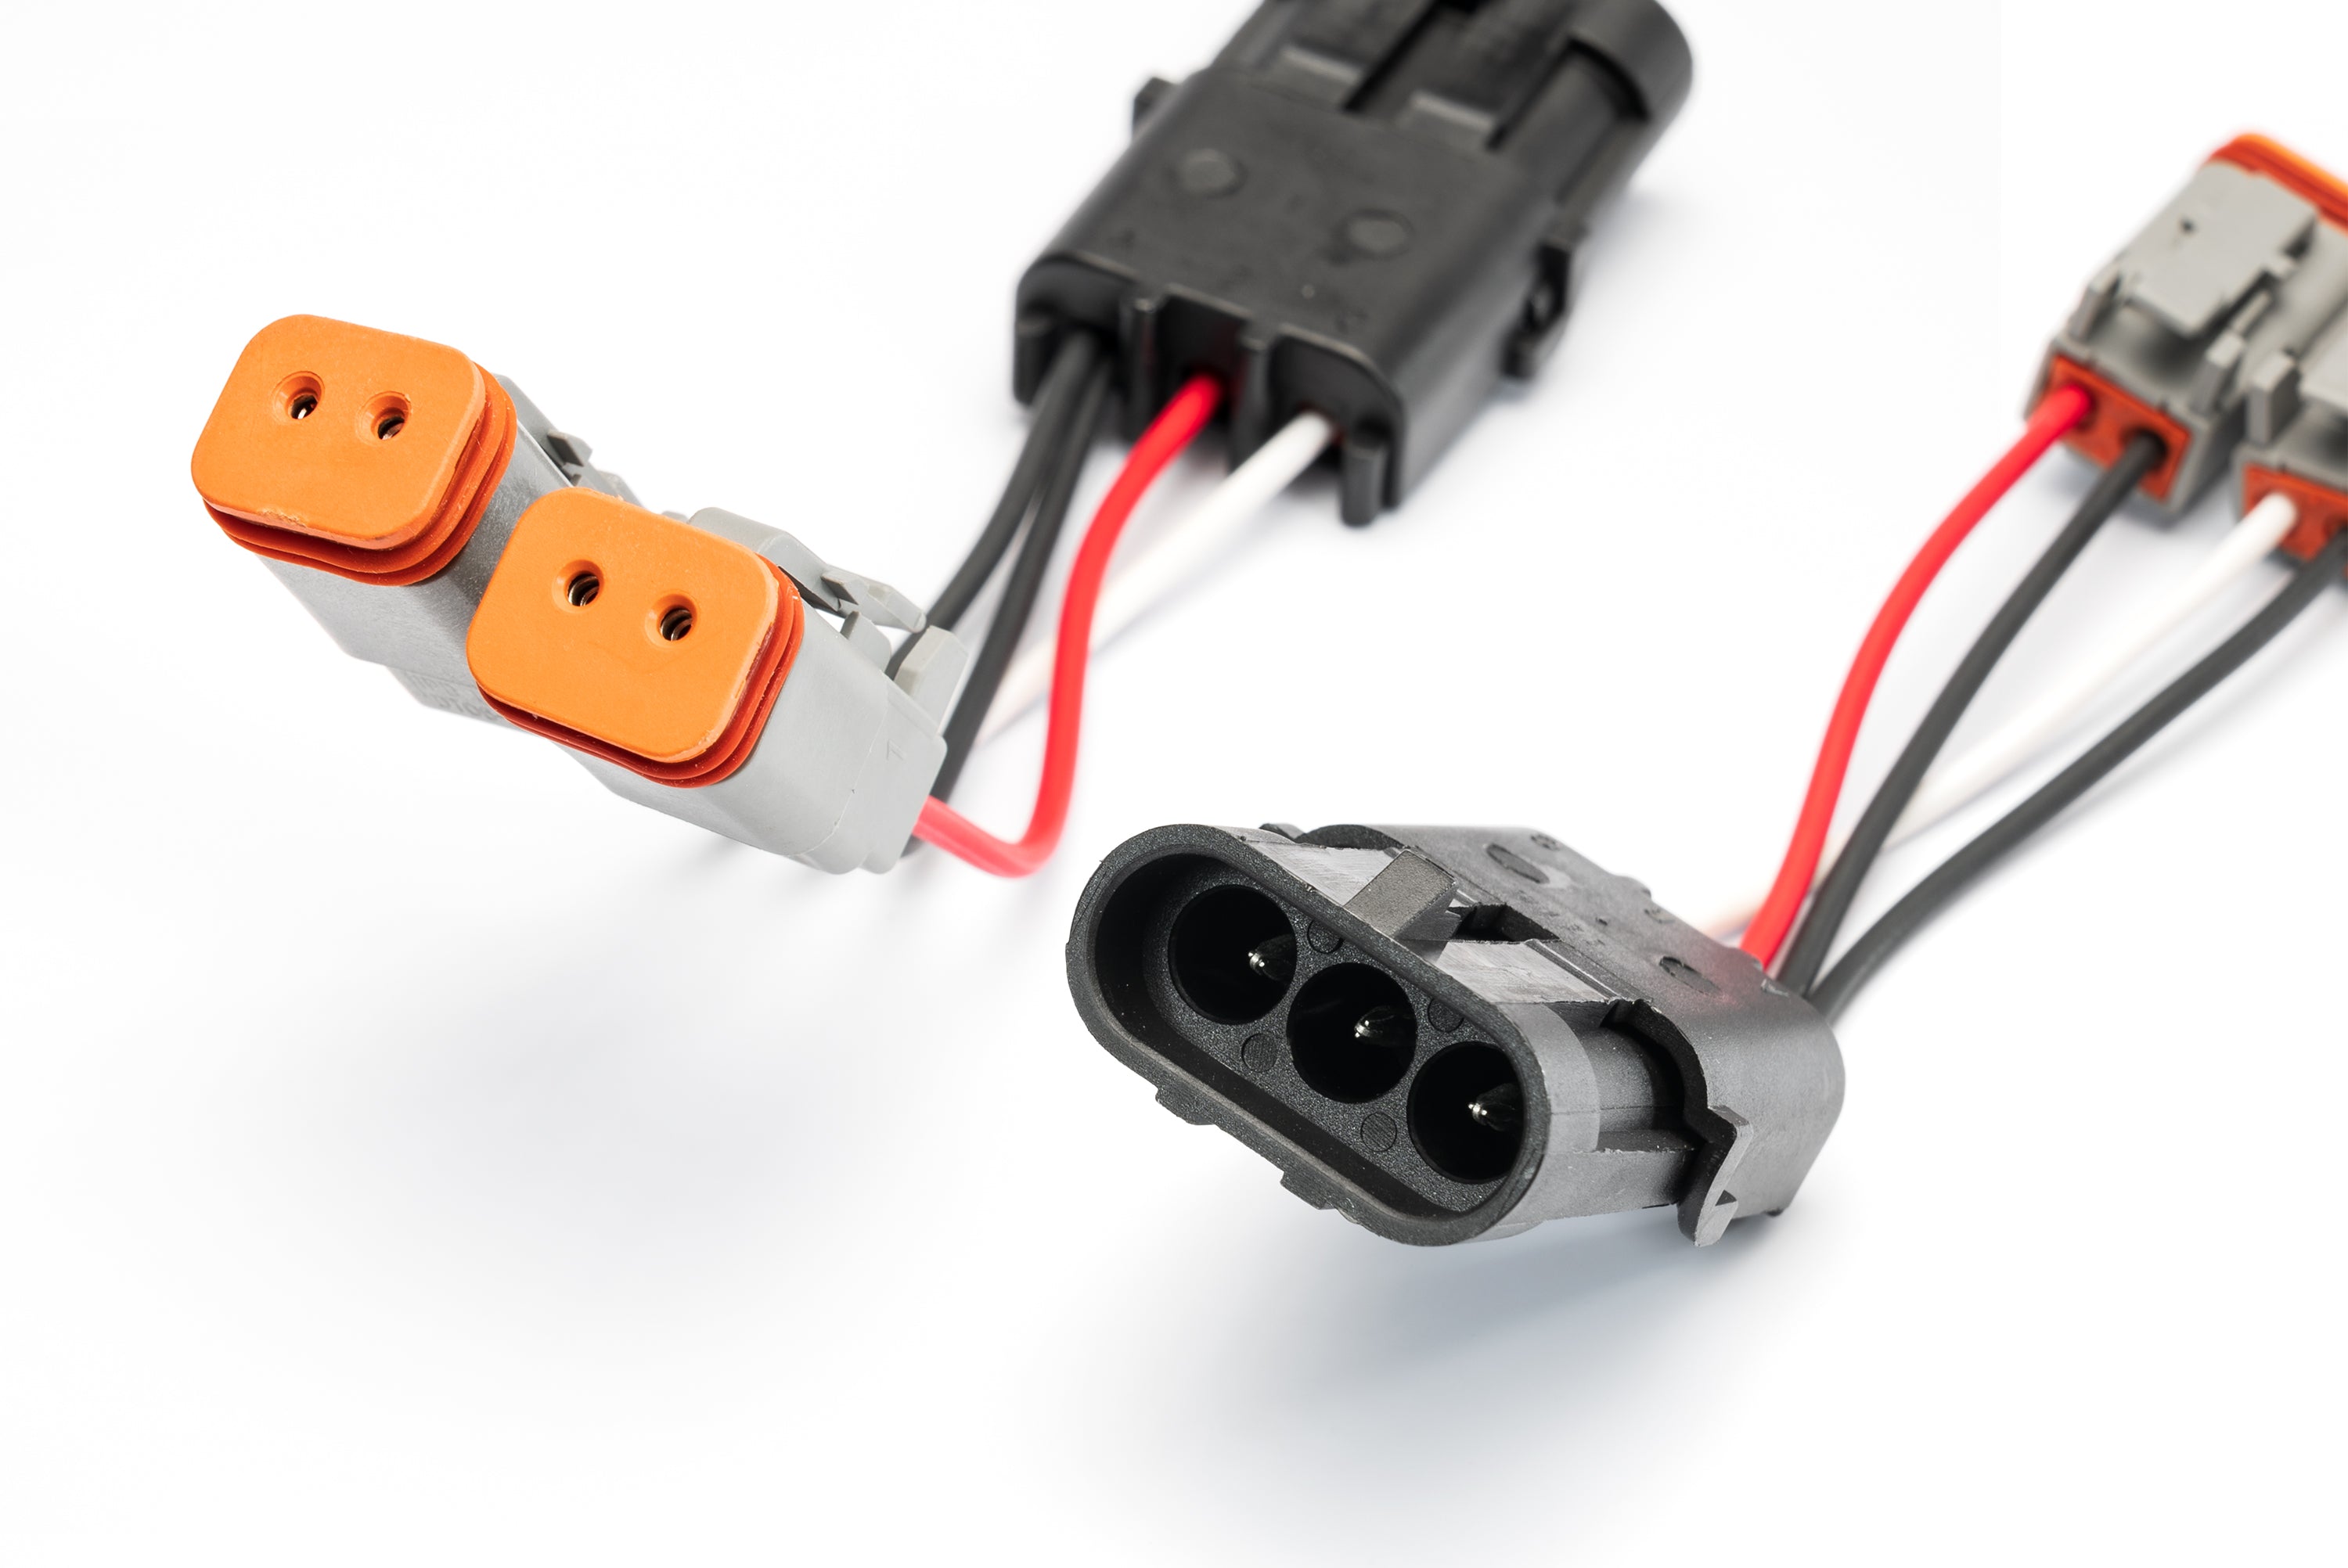 SPV Parts Harness 2 Pole DT Connector CROSSOVER Adapter SPLITTERS (Pair) - SPV Harness System (Works with MANY vehicles, See Details)